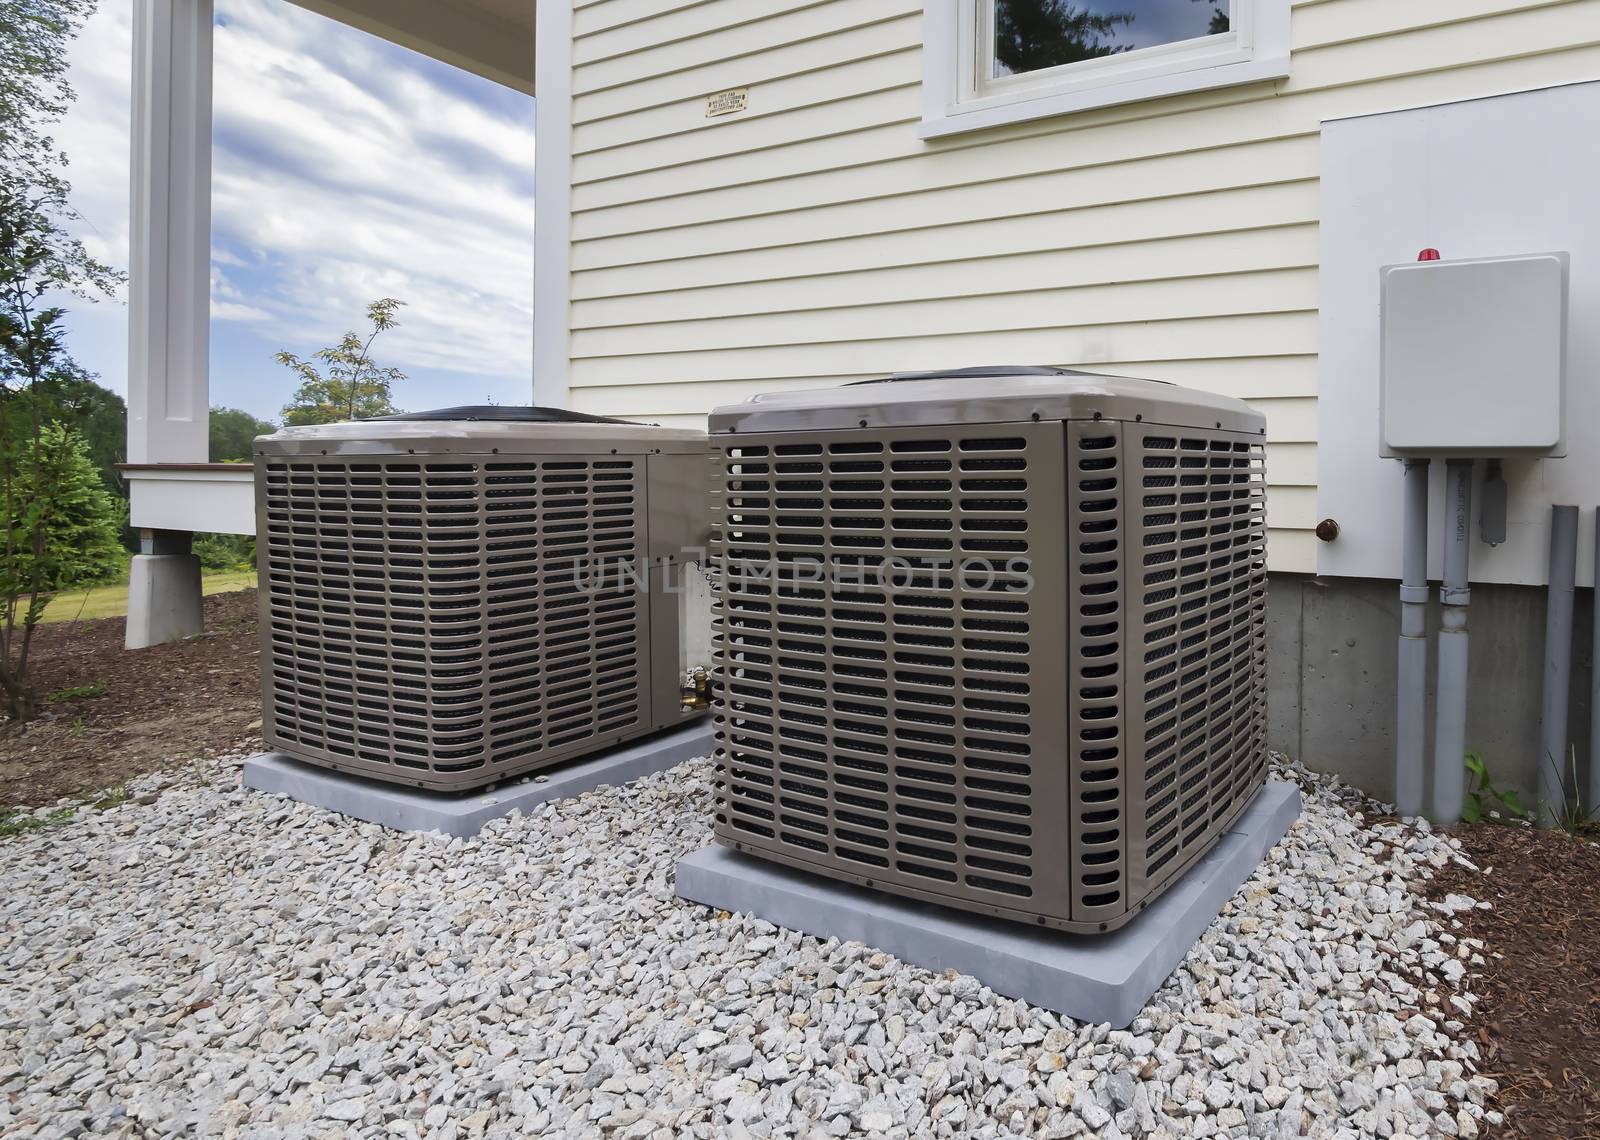 HVAC heating and air conditioning residential units